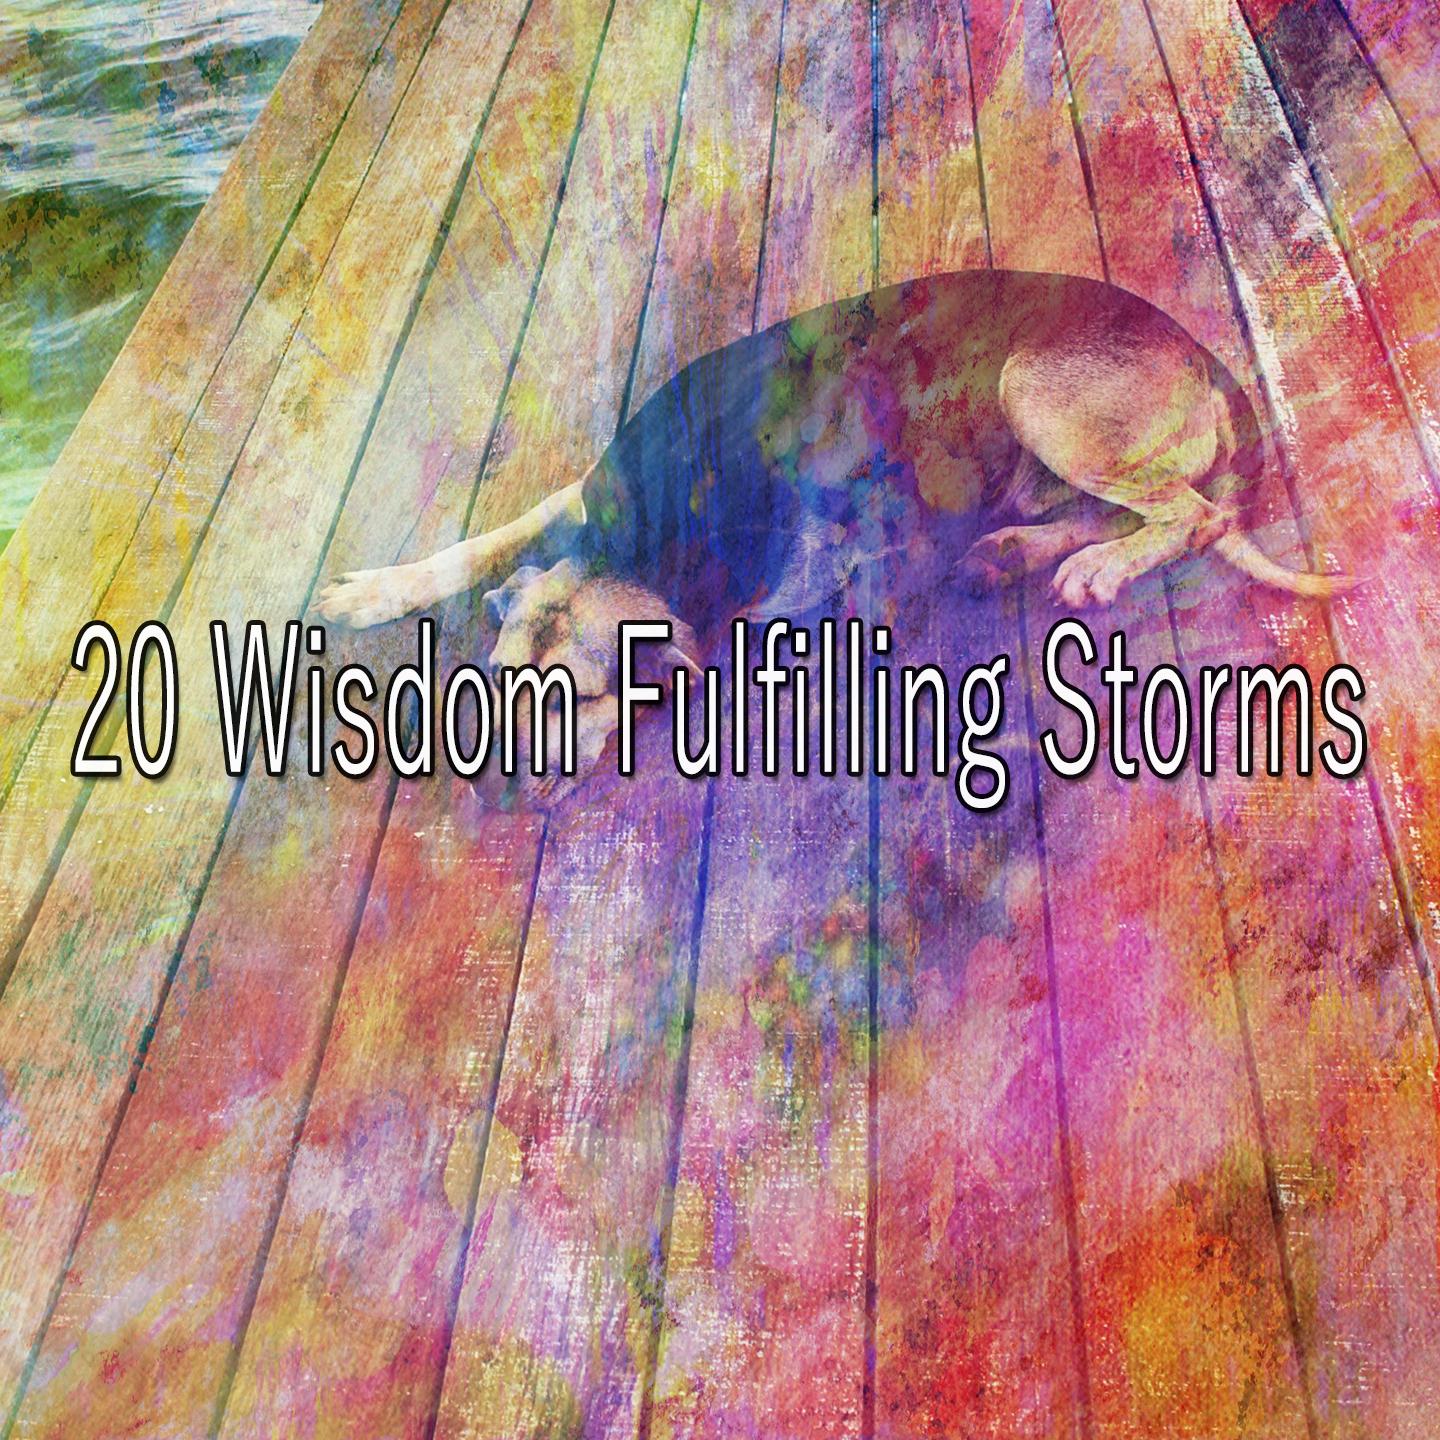 20 Wisdom Fulfilling Storms